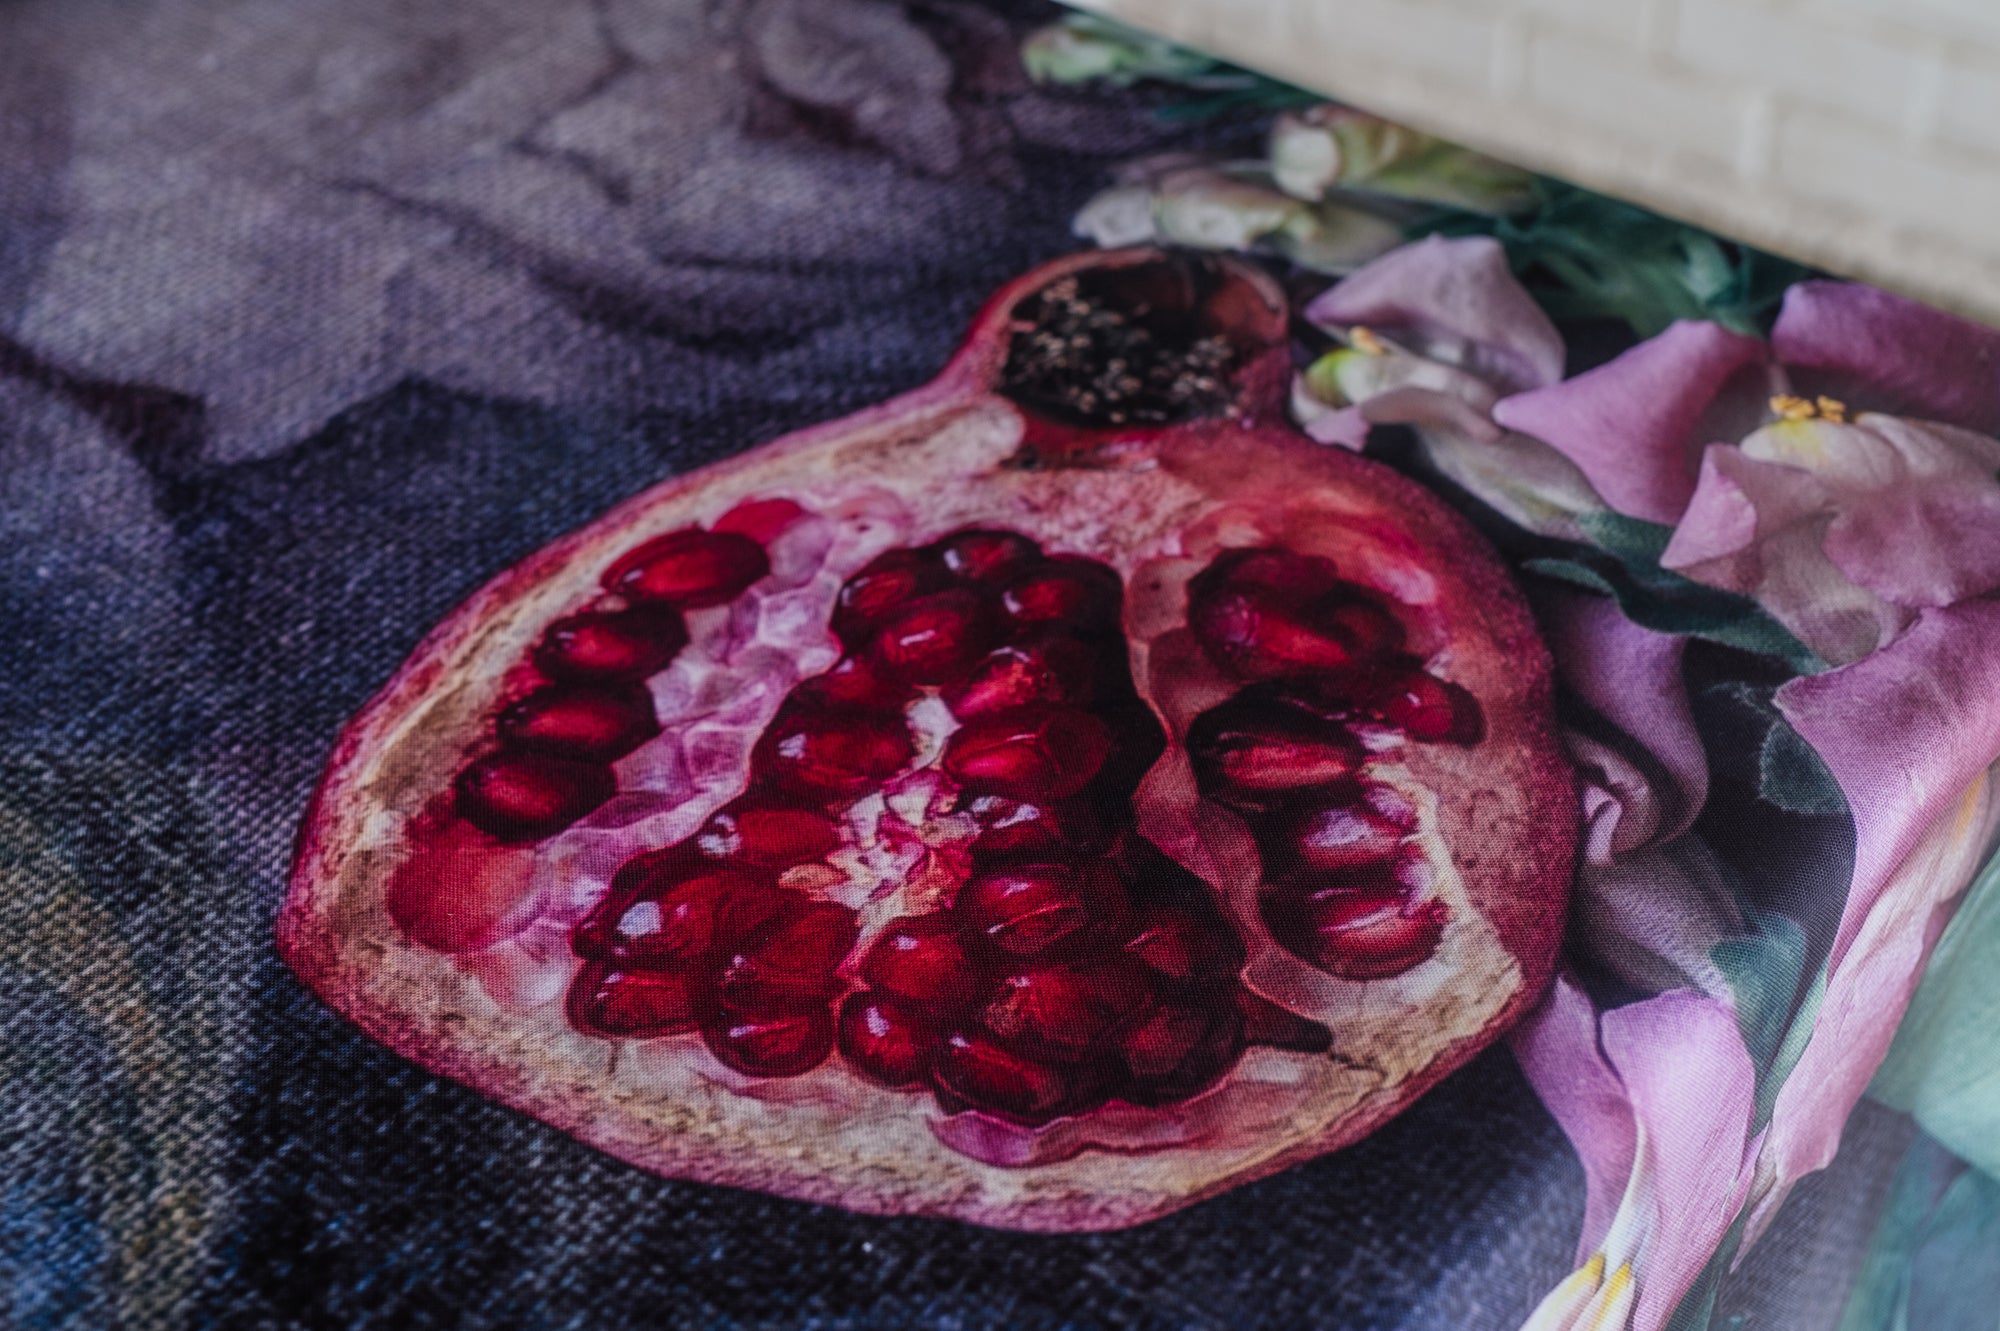 Tablecloth - Pomegranate and Flower